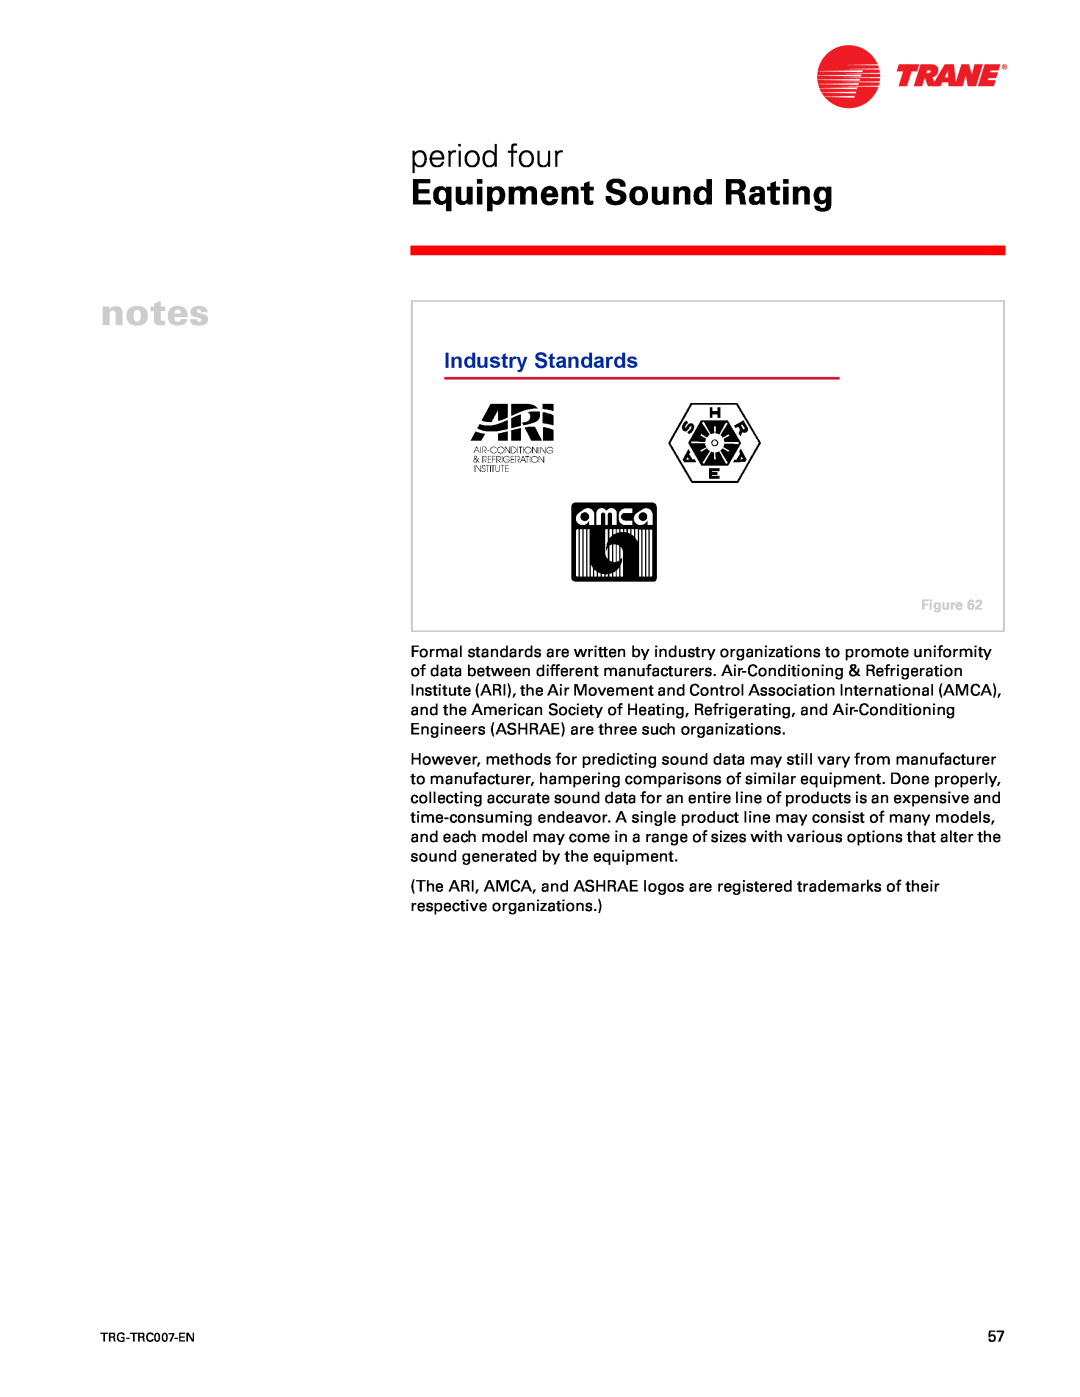 Trane TRG-TRC007-EN manual Industry Standards, Equipment Sound Rating, period four 